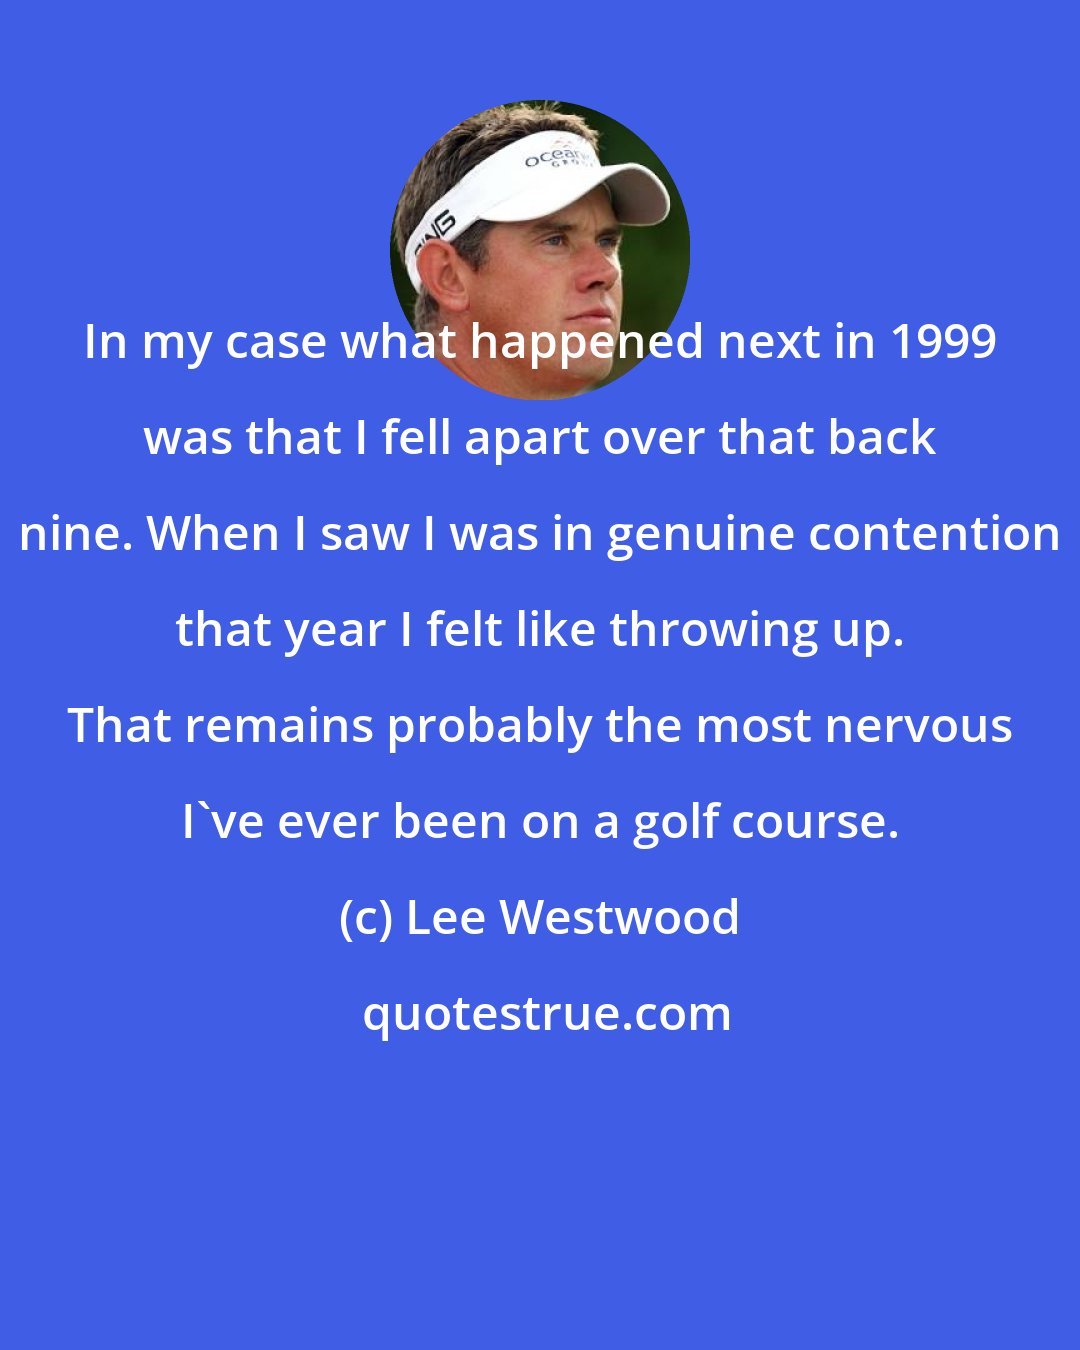 Lee Westwood: In my case what happened next in 1999 was that I fell apart over that back nine. When I saw I was in genuine contention that year I felt like throwing up. That remains probably the most nervous I've ever been on a golf course.